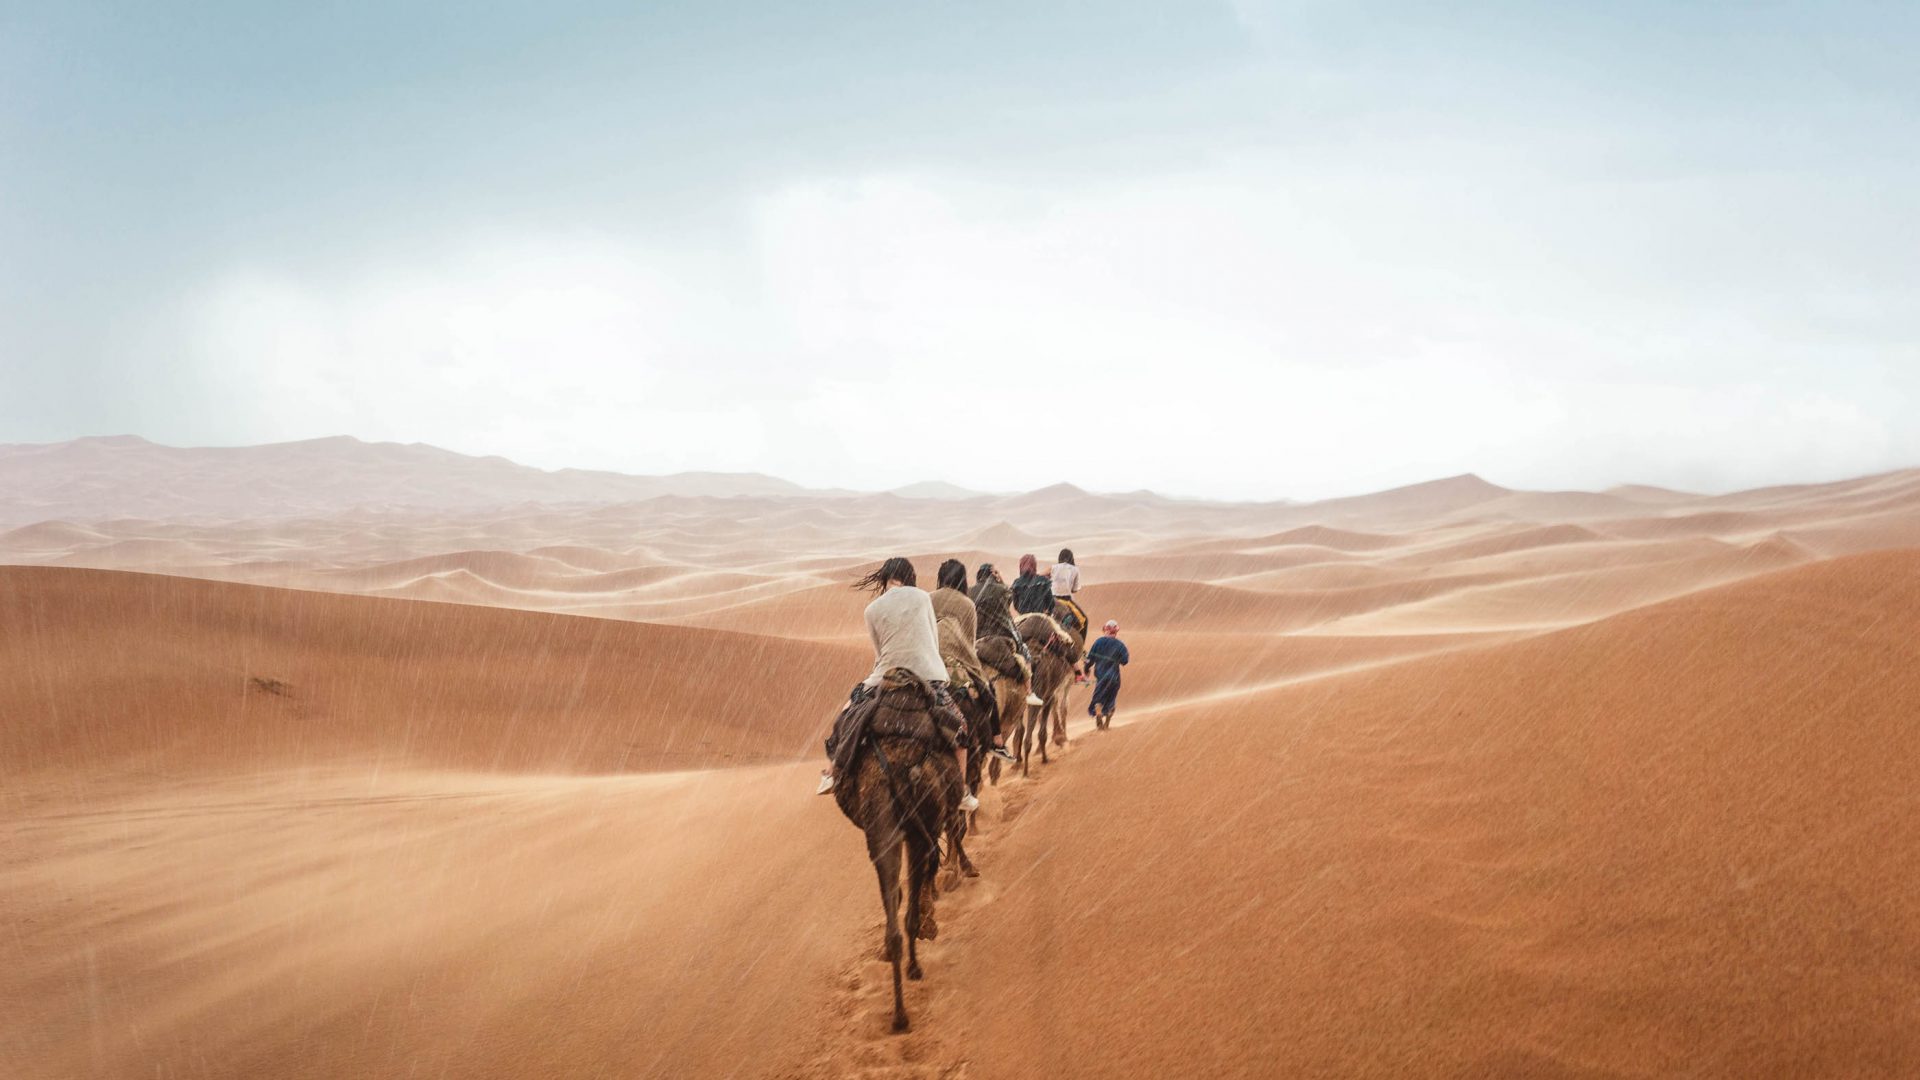 A guide leads tourists on camels through the desert.